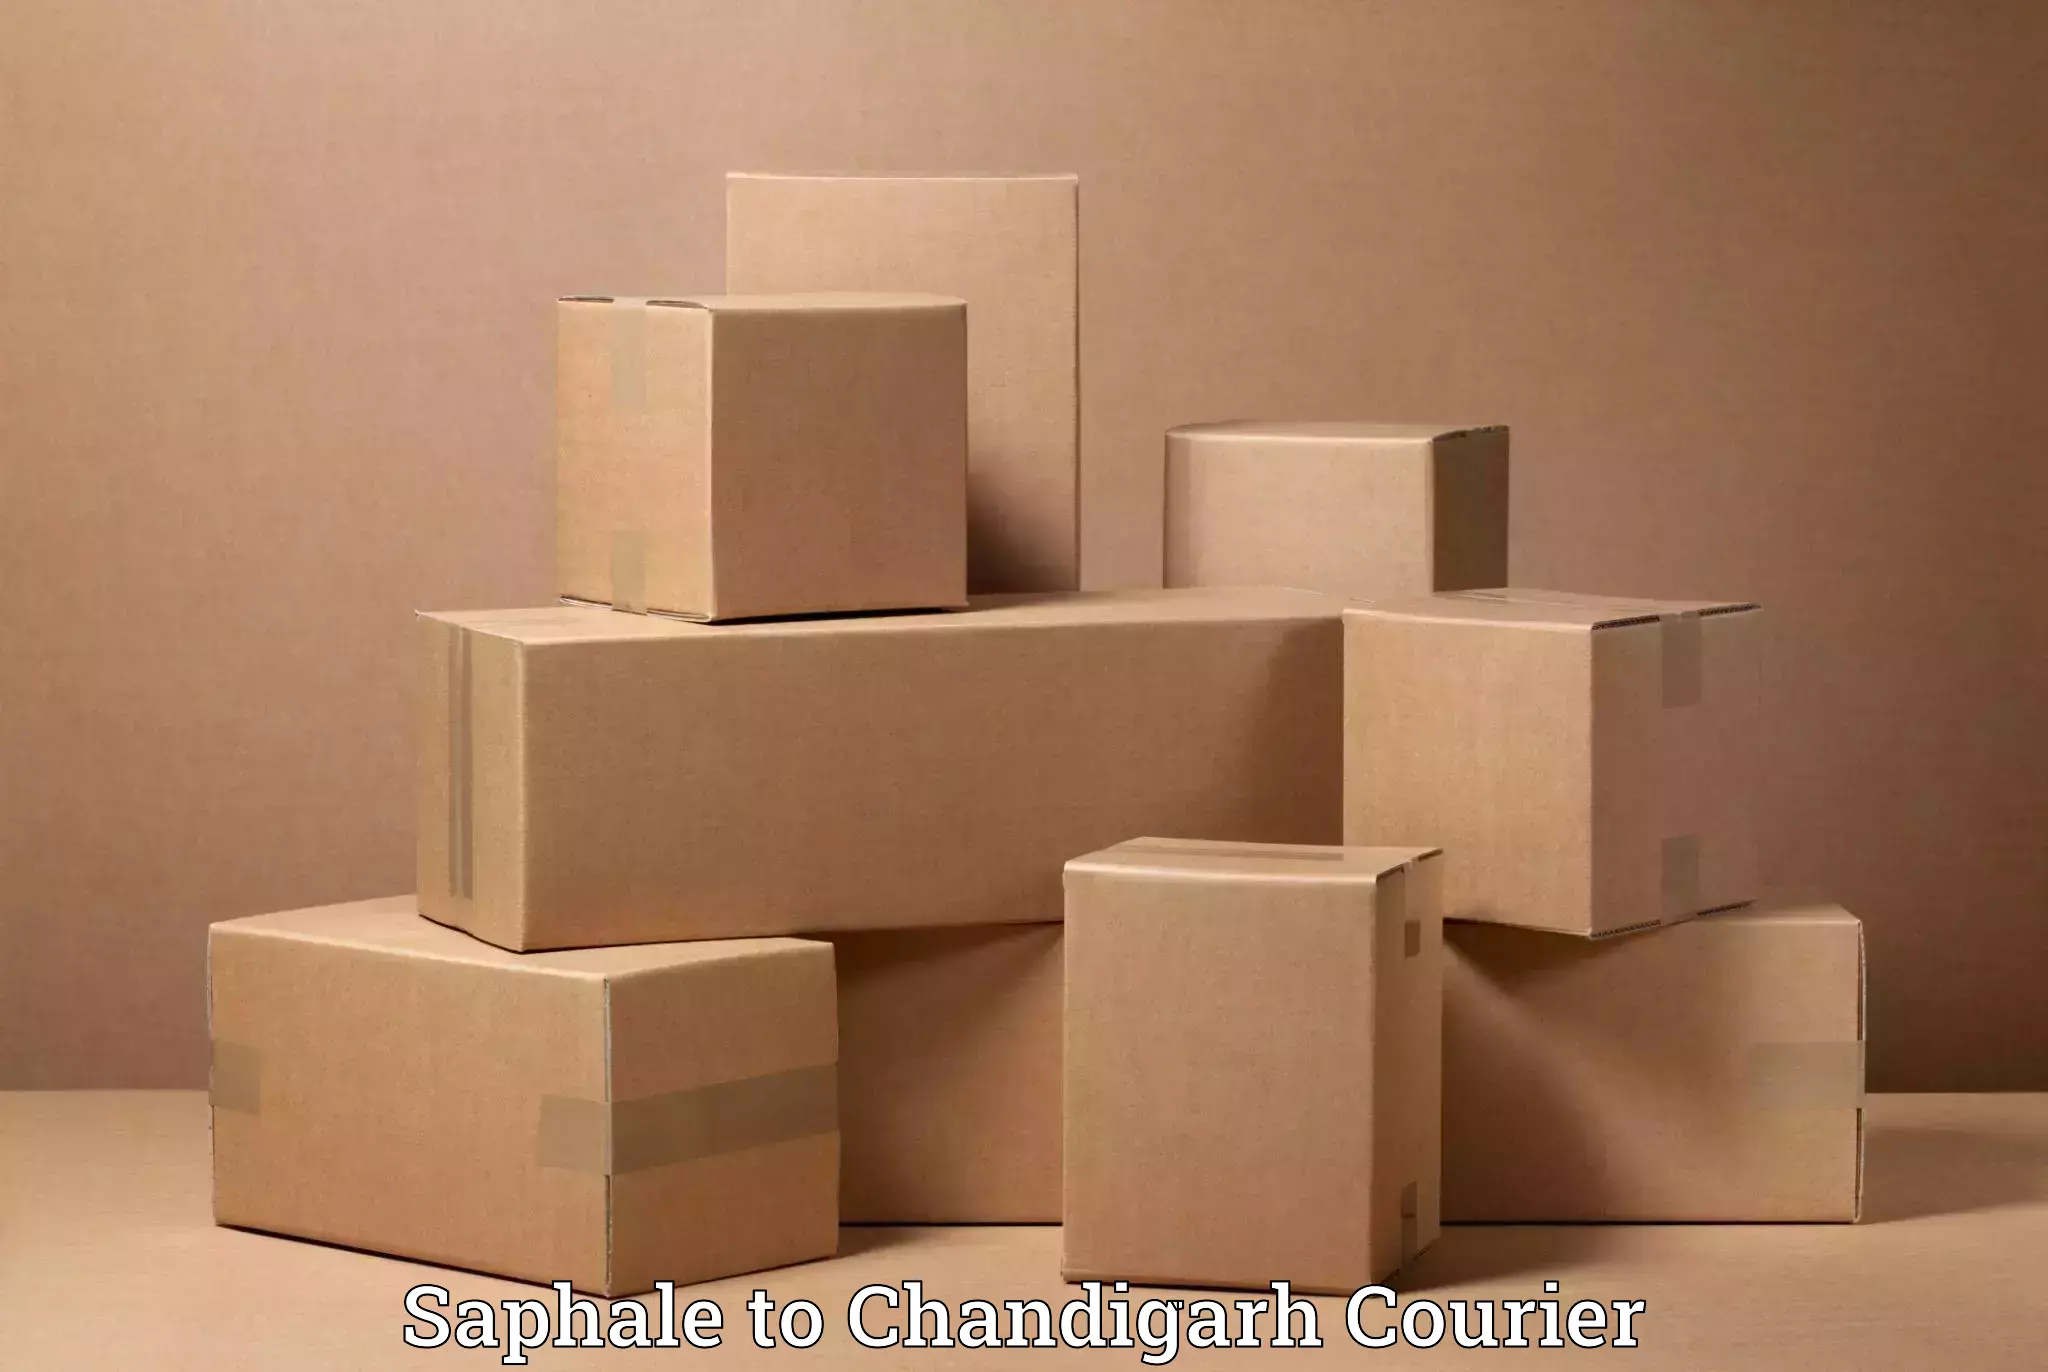 Quality household movers Saphale to Chandigarh